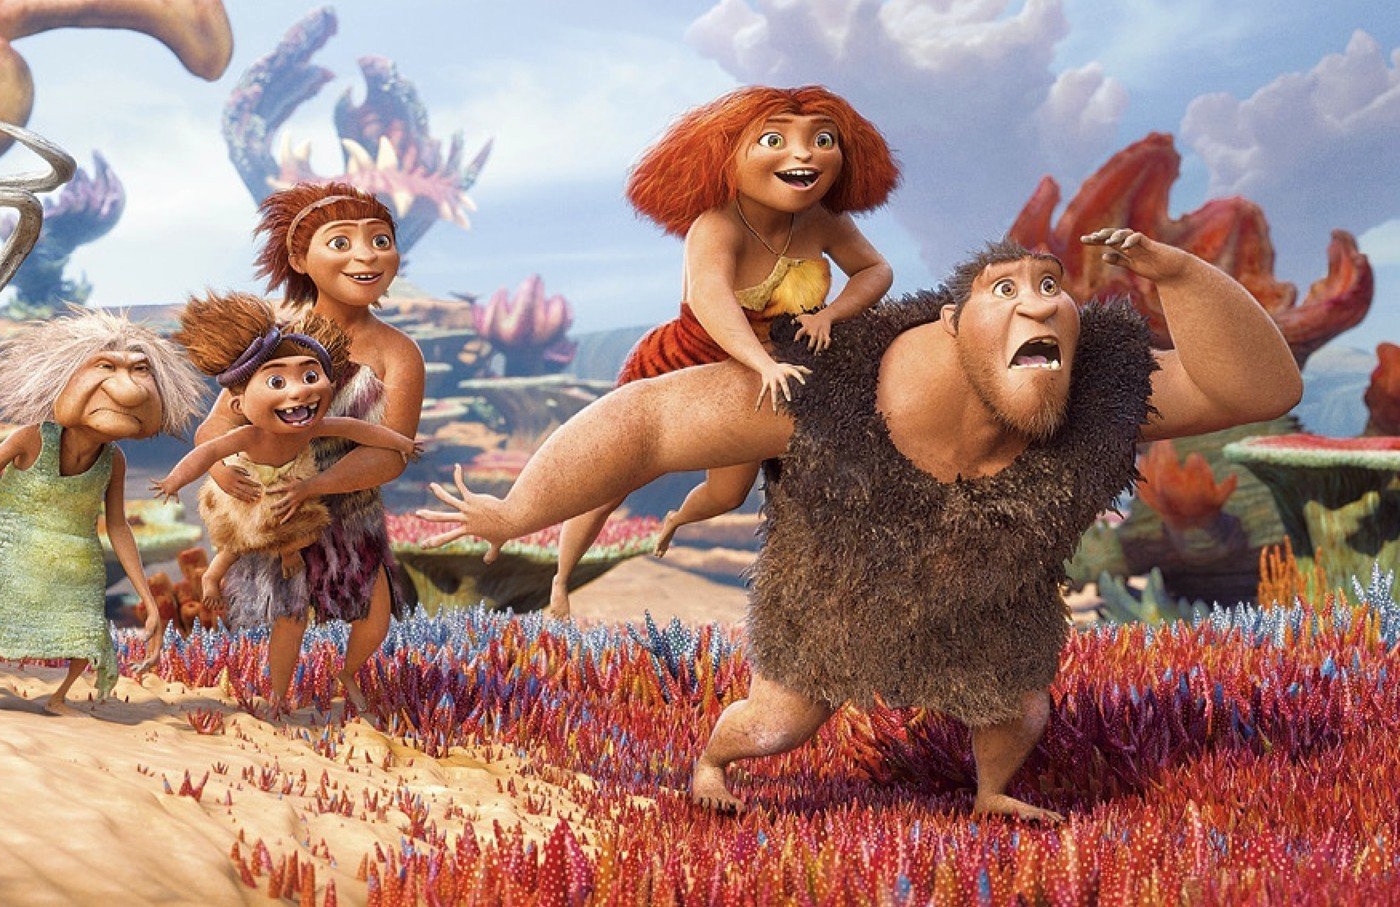 The Croods #1